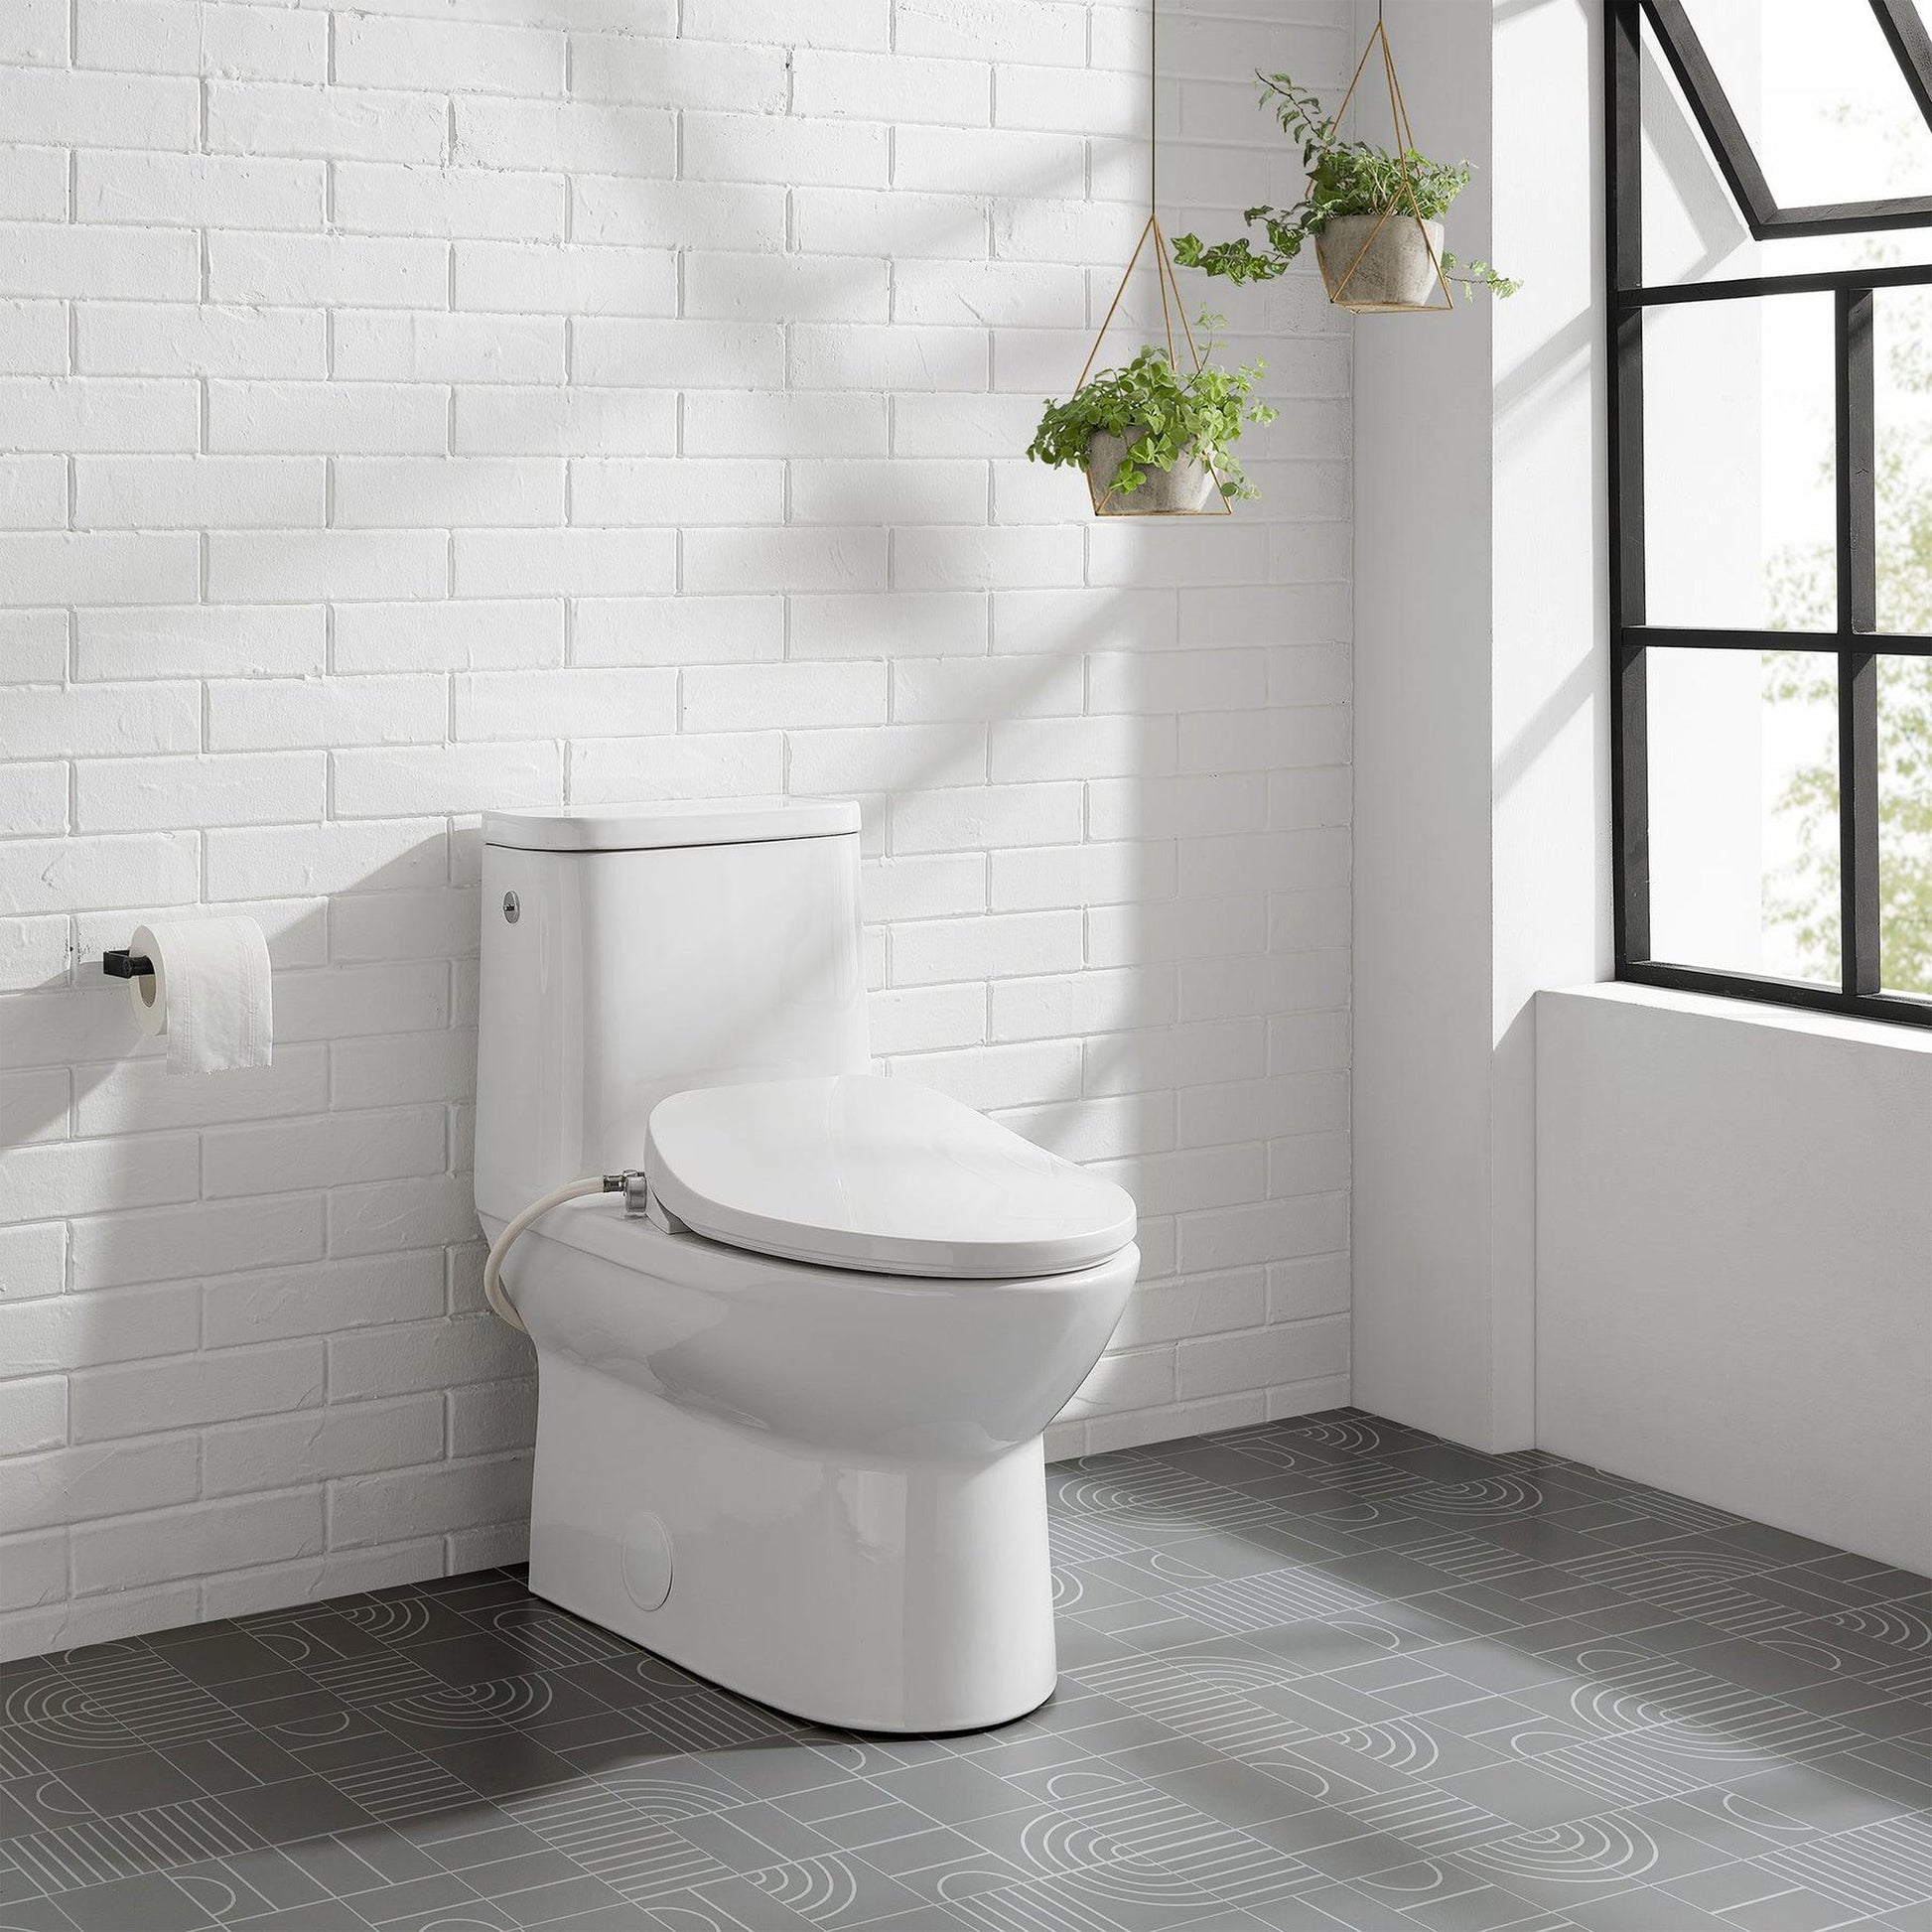 Swiss Madison Avancer 15" x 29" One-Piece White Elongated Floor-Mounted Toilet With 0.95/1.6 GPF Touchless Dual Flush and Cascade Smart Seat Bidet